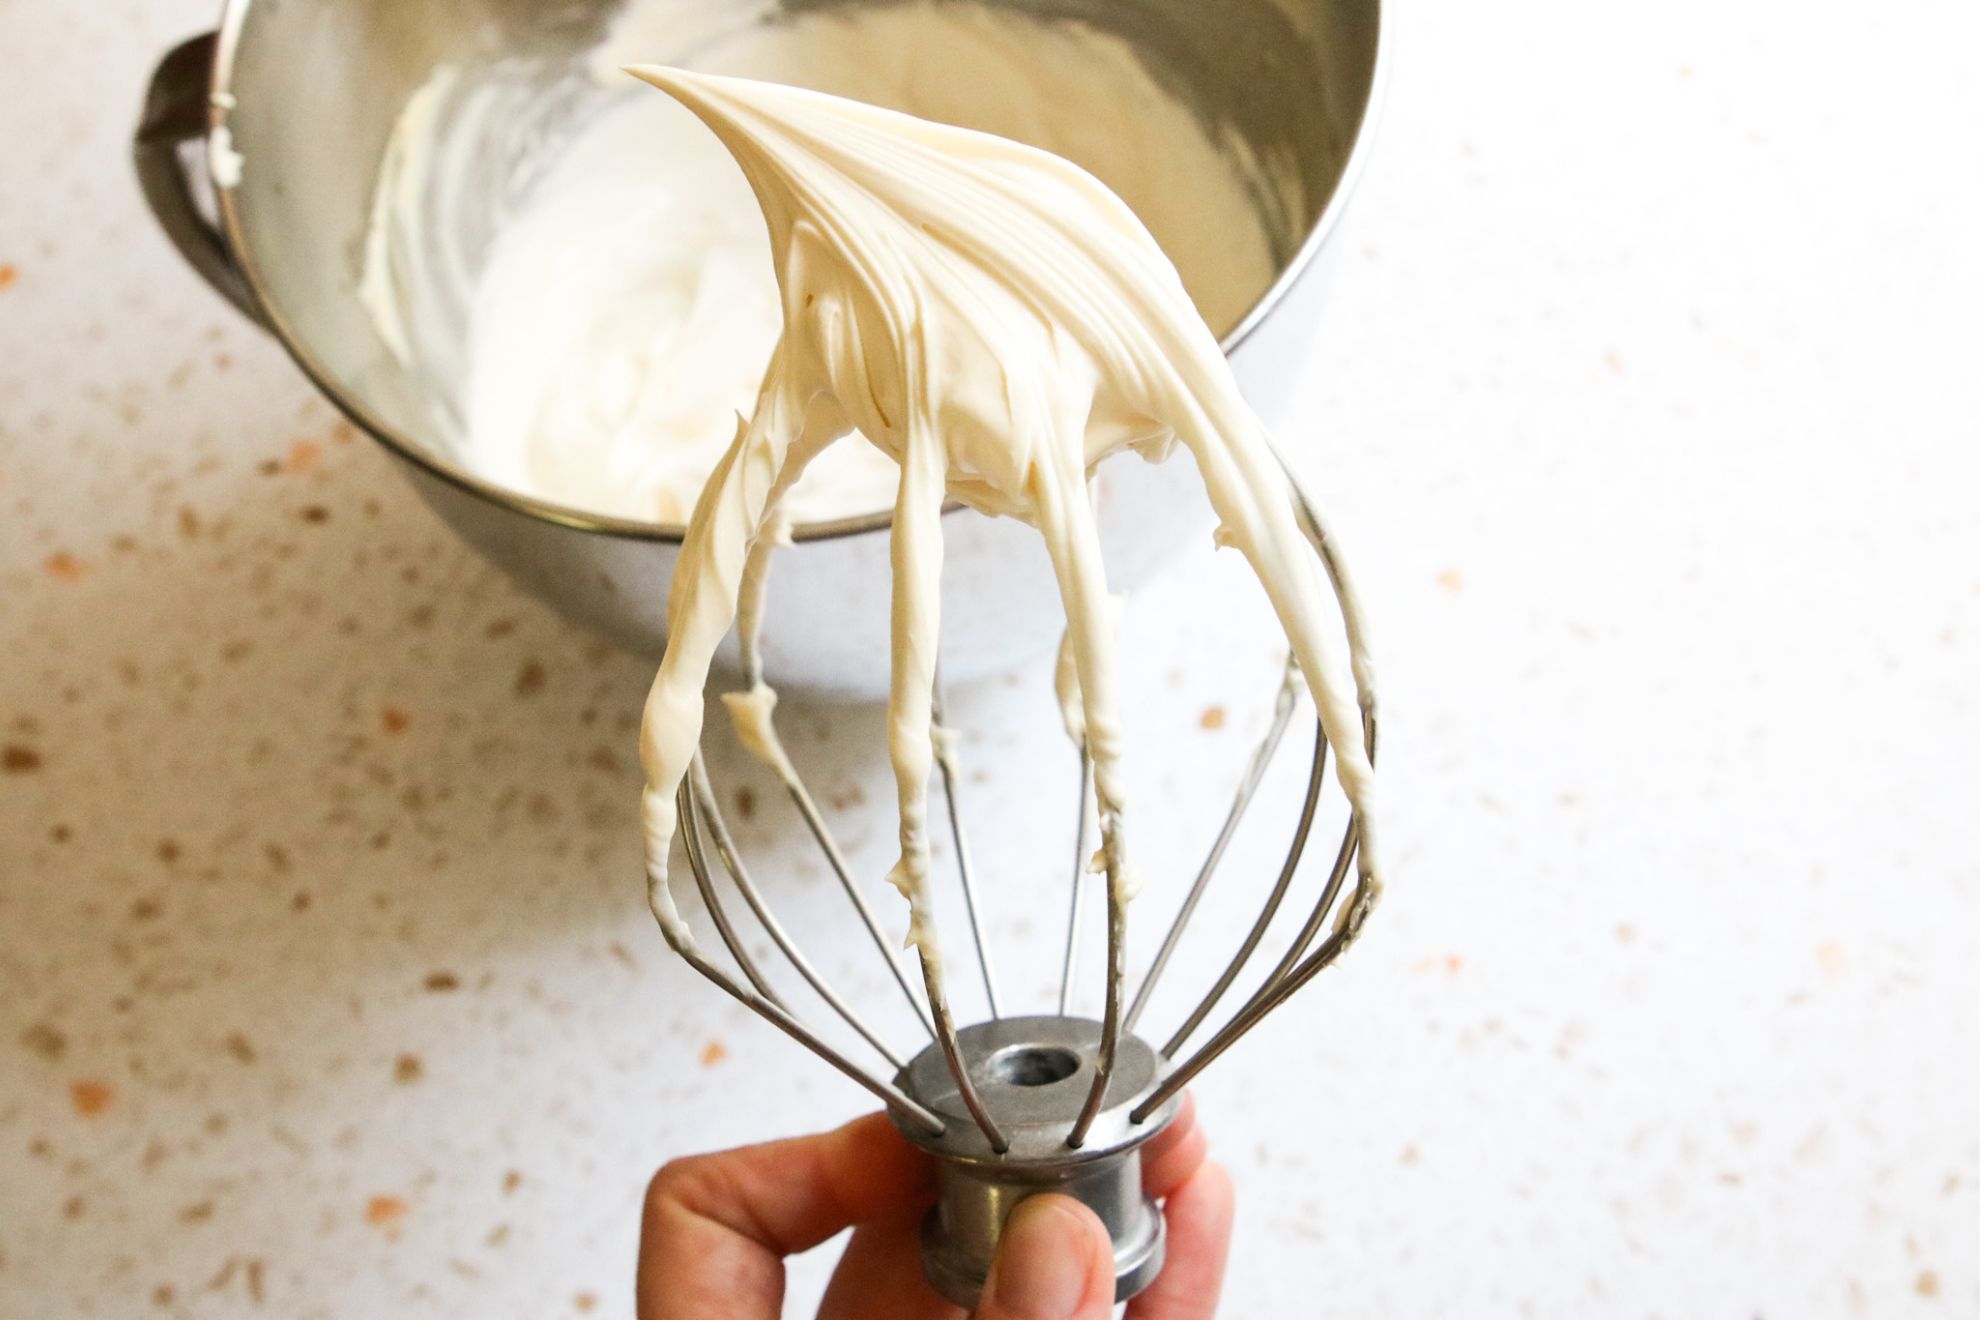 This is a horizontal image of a hand holding the whisk of a standing electric mixer that has been detached. A firm peak of vanilla mascarpone frosting is in the whisk. In the background is a large silver mixing bowl with more frosting on a white terrazzo surface.